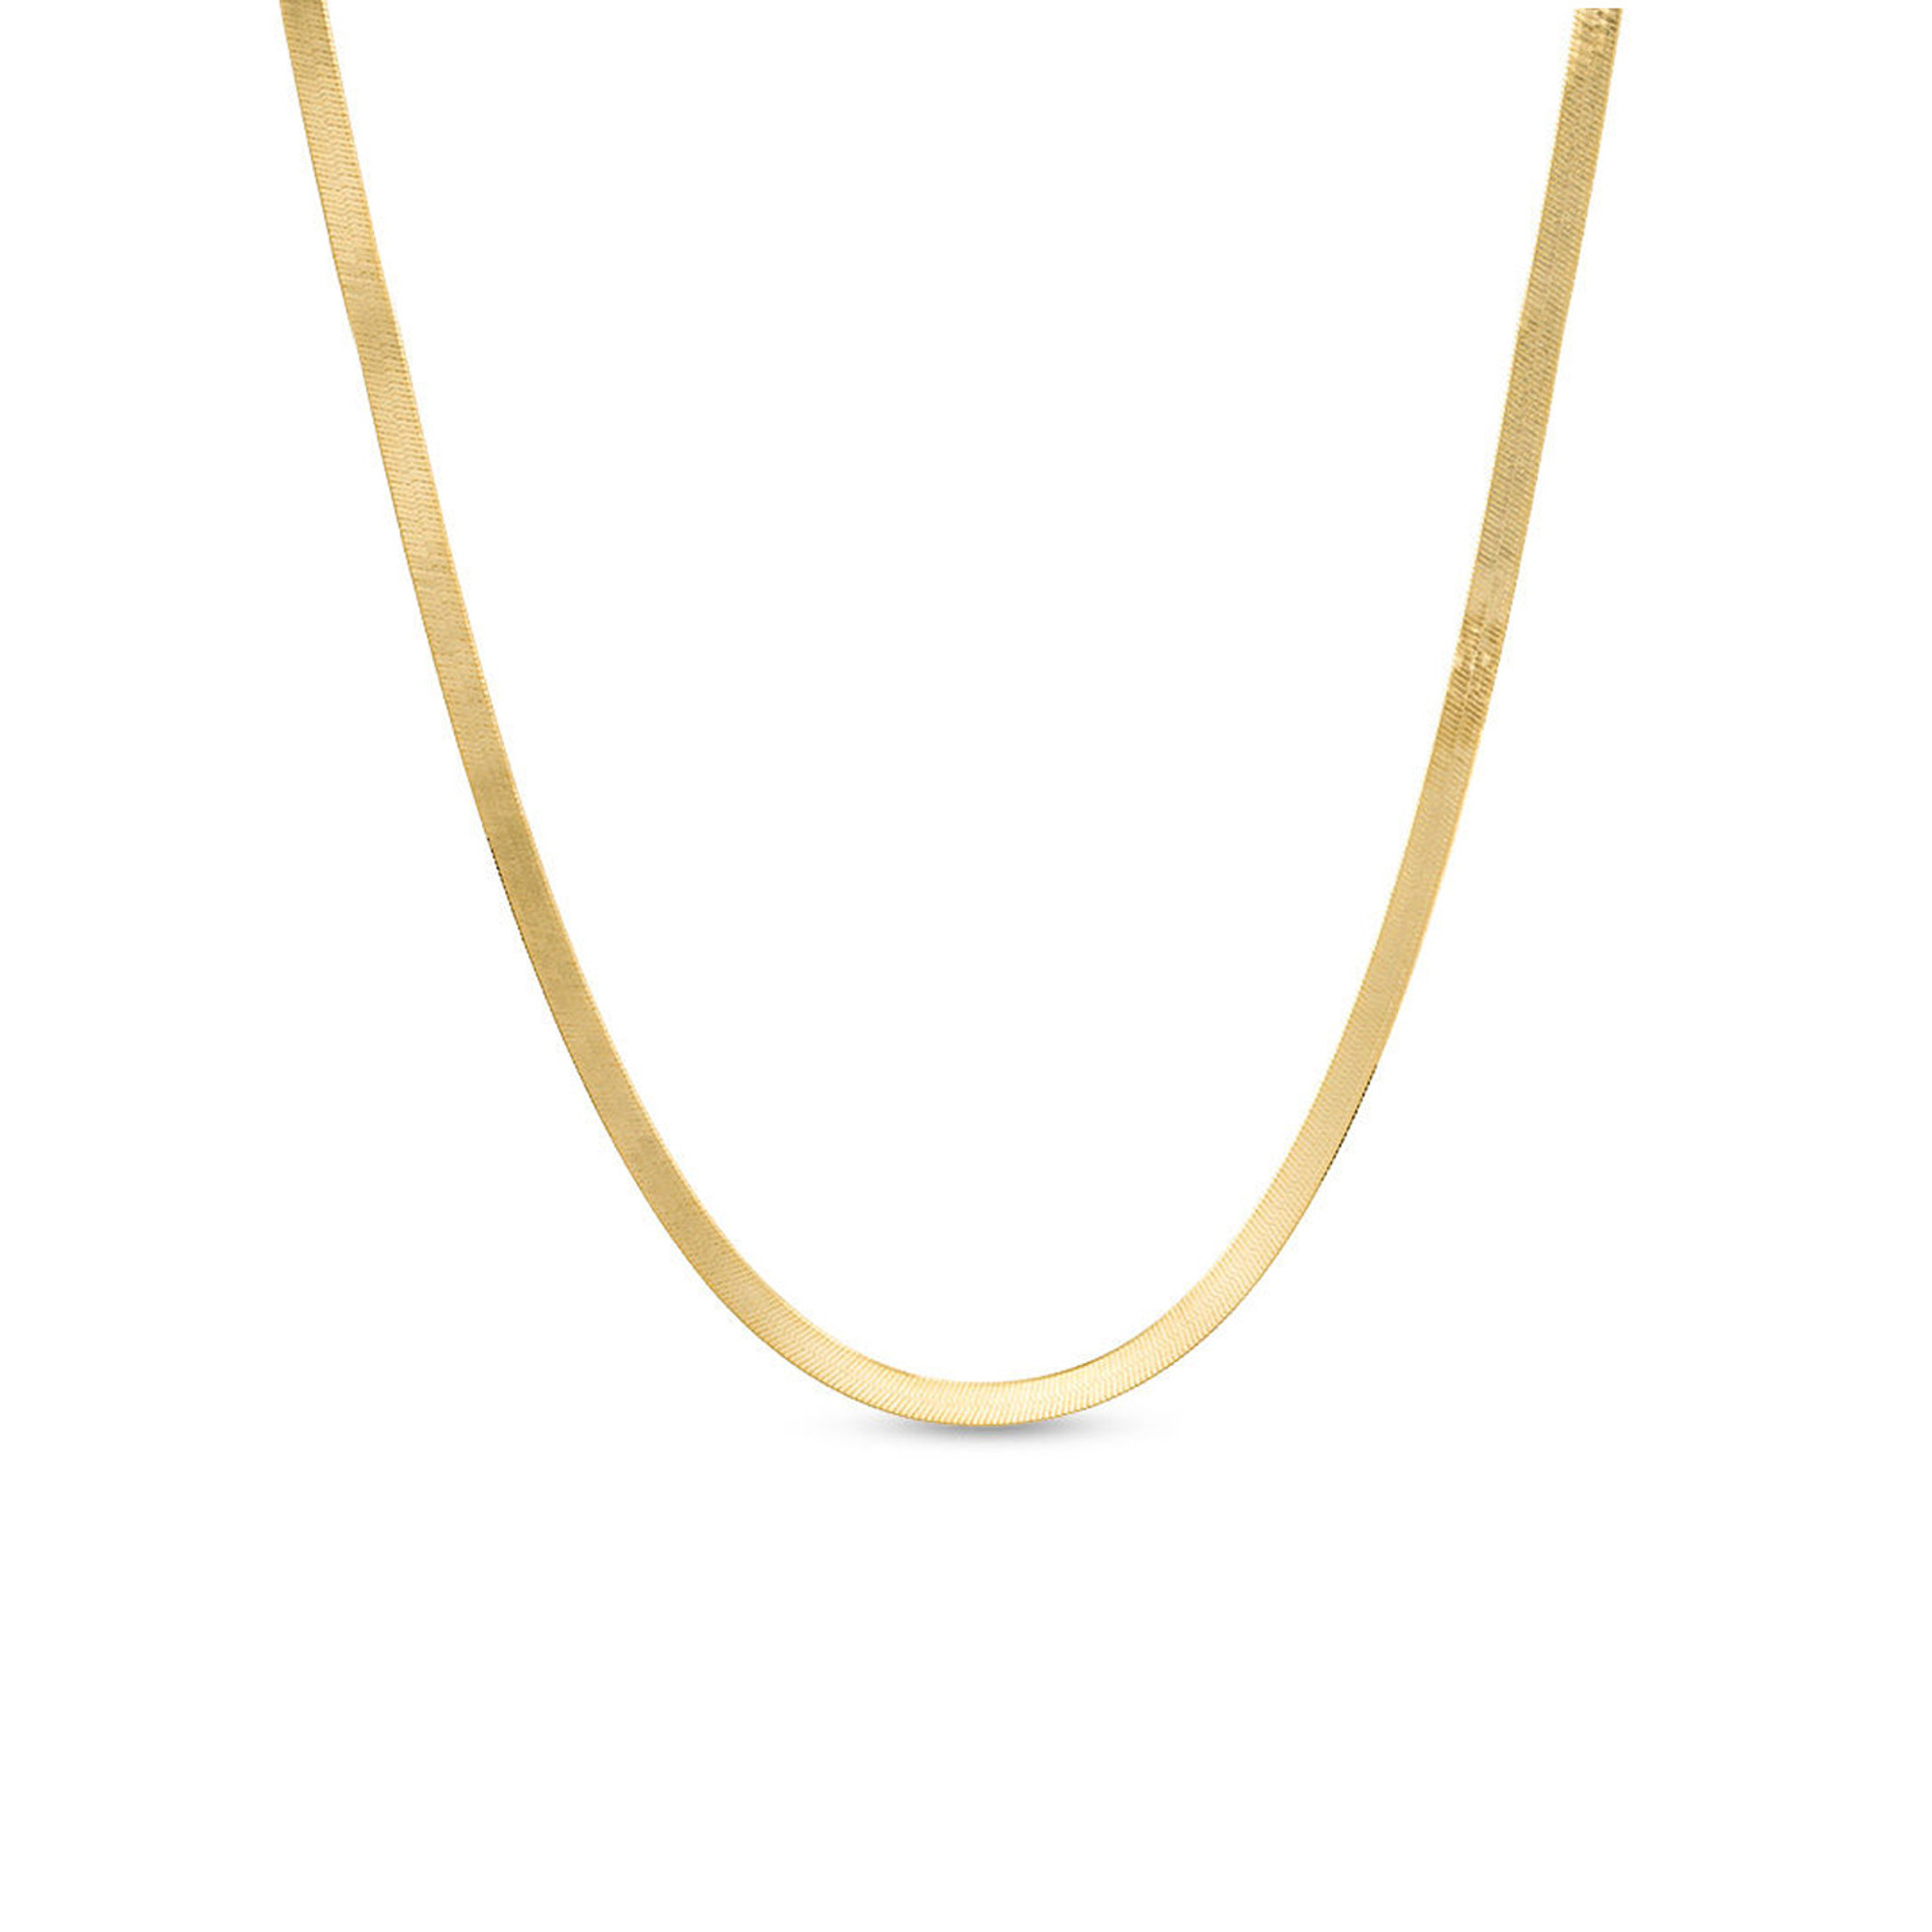 14K Solid White Gold Herringbone Necklace Chain 16 